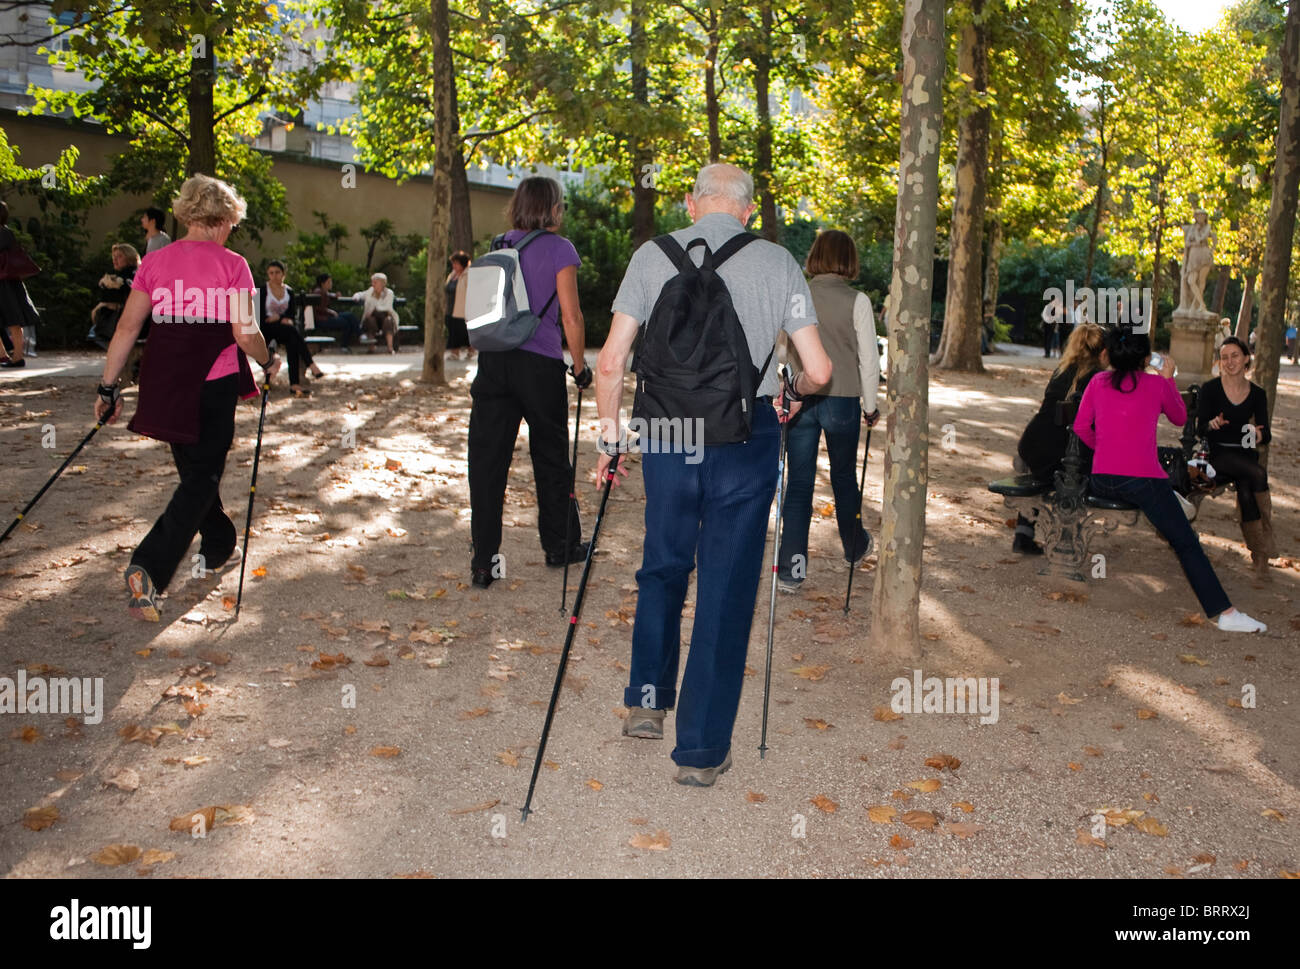 Paris, France, groups of people in park of Seniors Exercising, Nordic Walking in Luxembourg Gardens, Urban Park, Jardin du Luxembourg, elderly people holiday europe, french old man, ville de Paris nature, Rear view of group of seniors Stock Photo